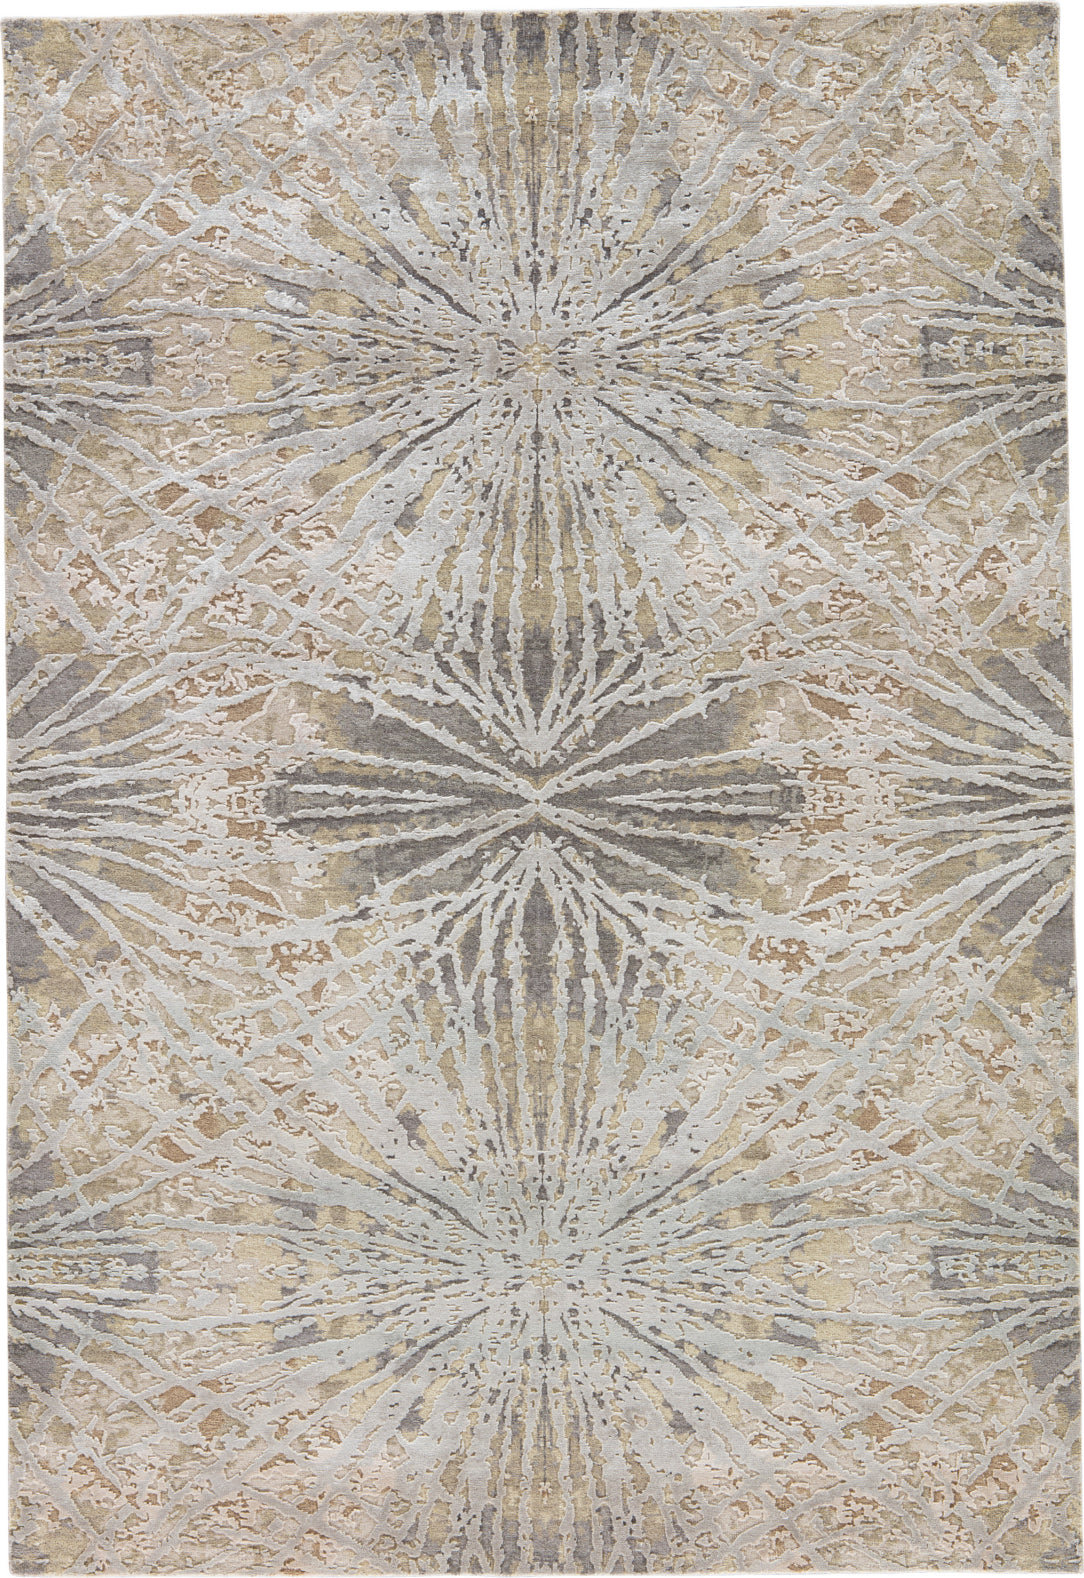 Jaipur Living Chaos Theory By Kavi Thea CKV25 Gray/Beige Area Rug - Top Down